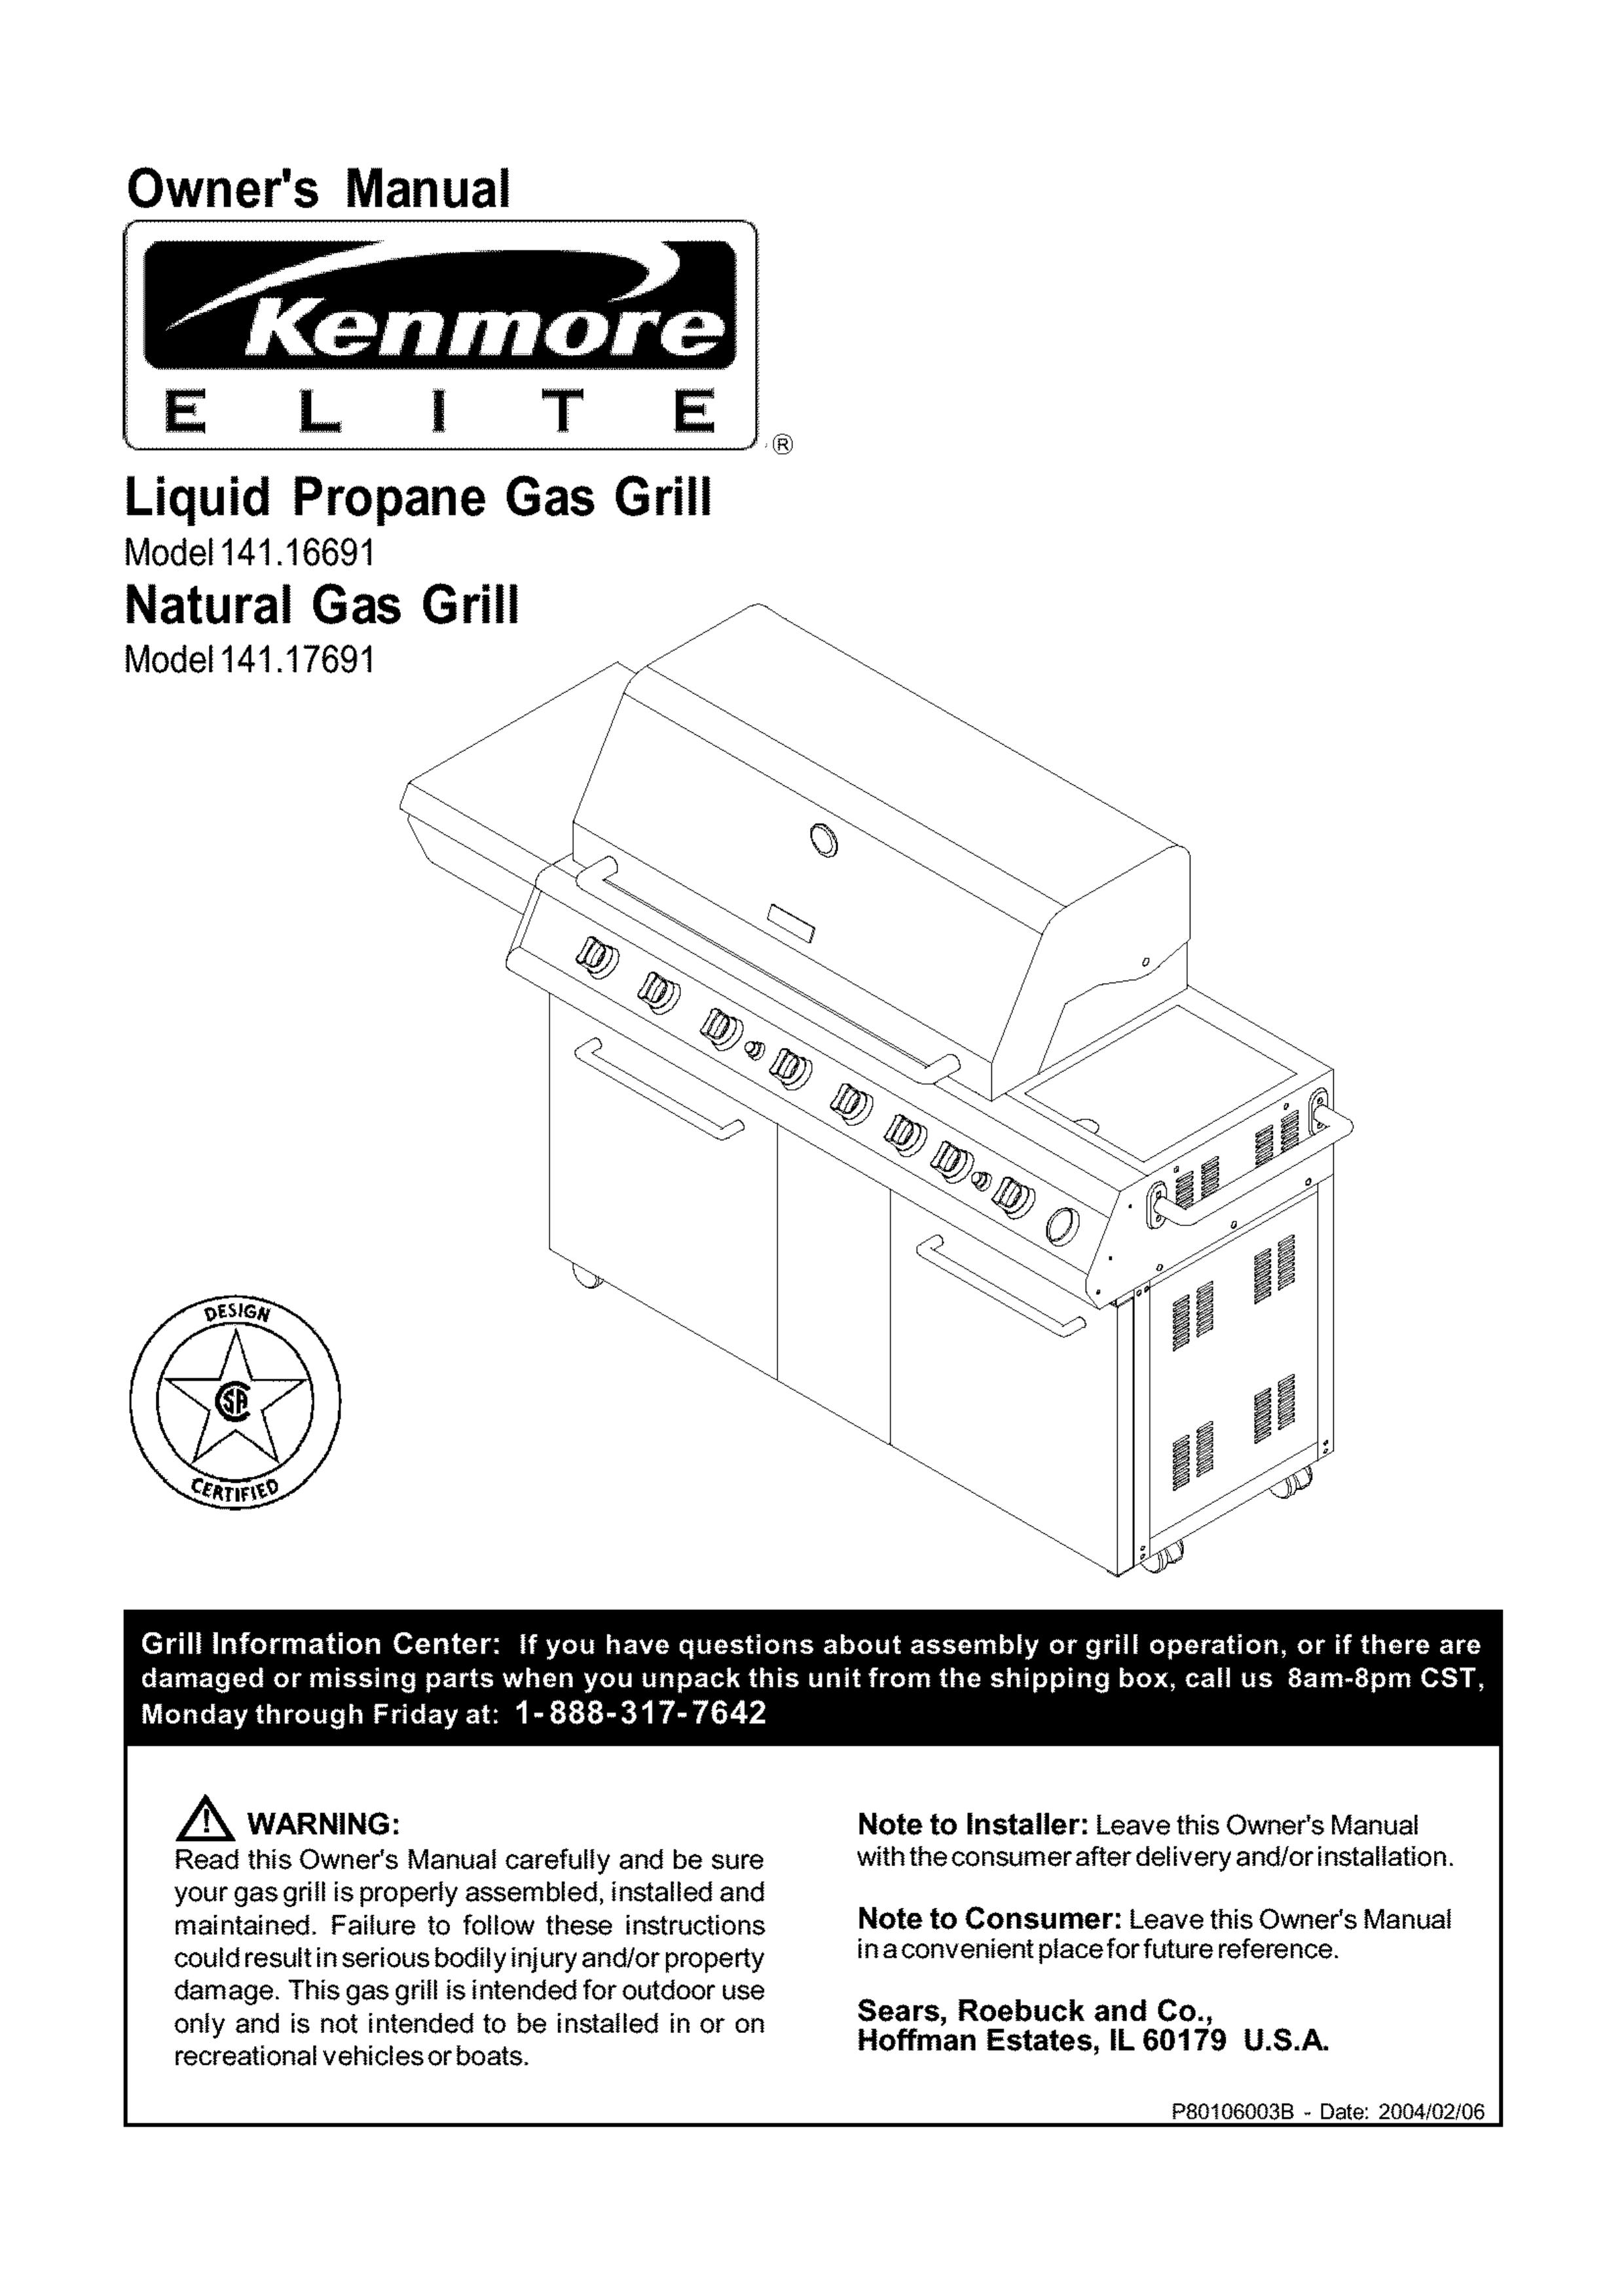 Kenmore 141.16691 Gas Grill User Manual